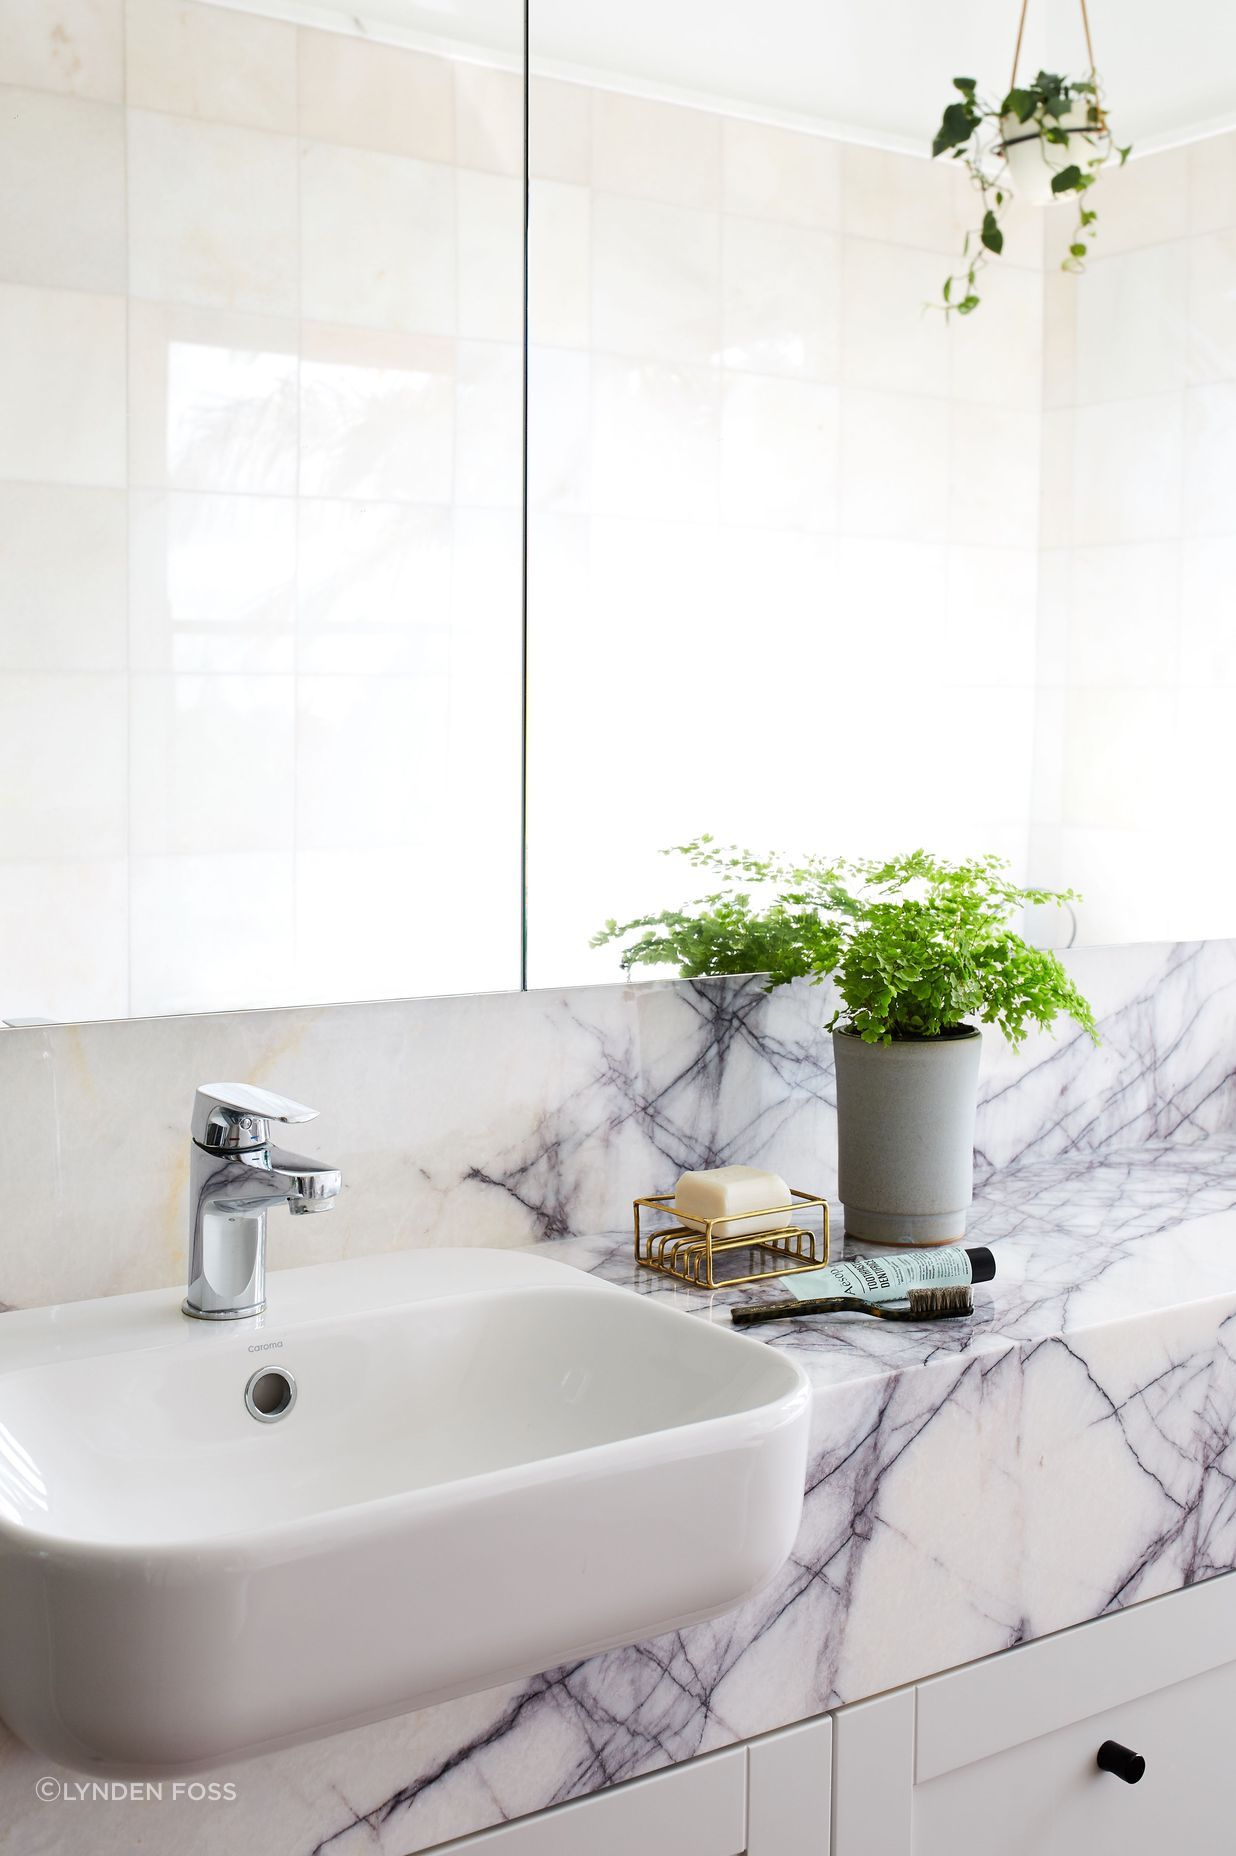 The master ensuite is modern yet tactile with a stone counter top.